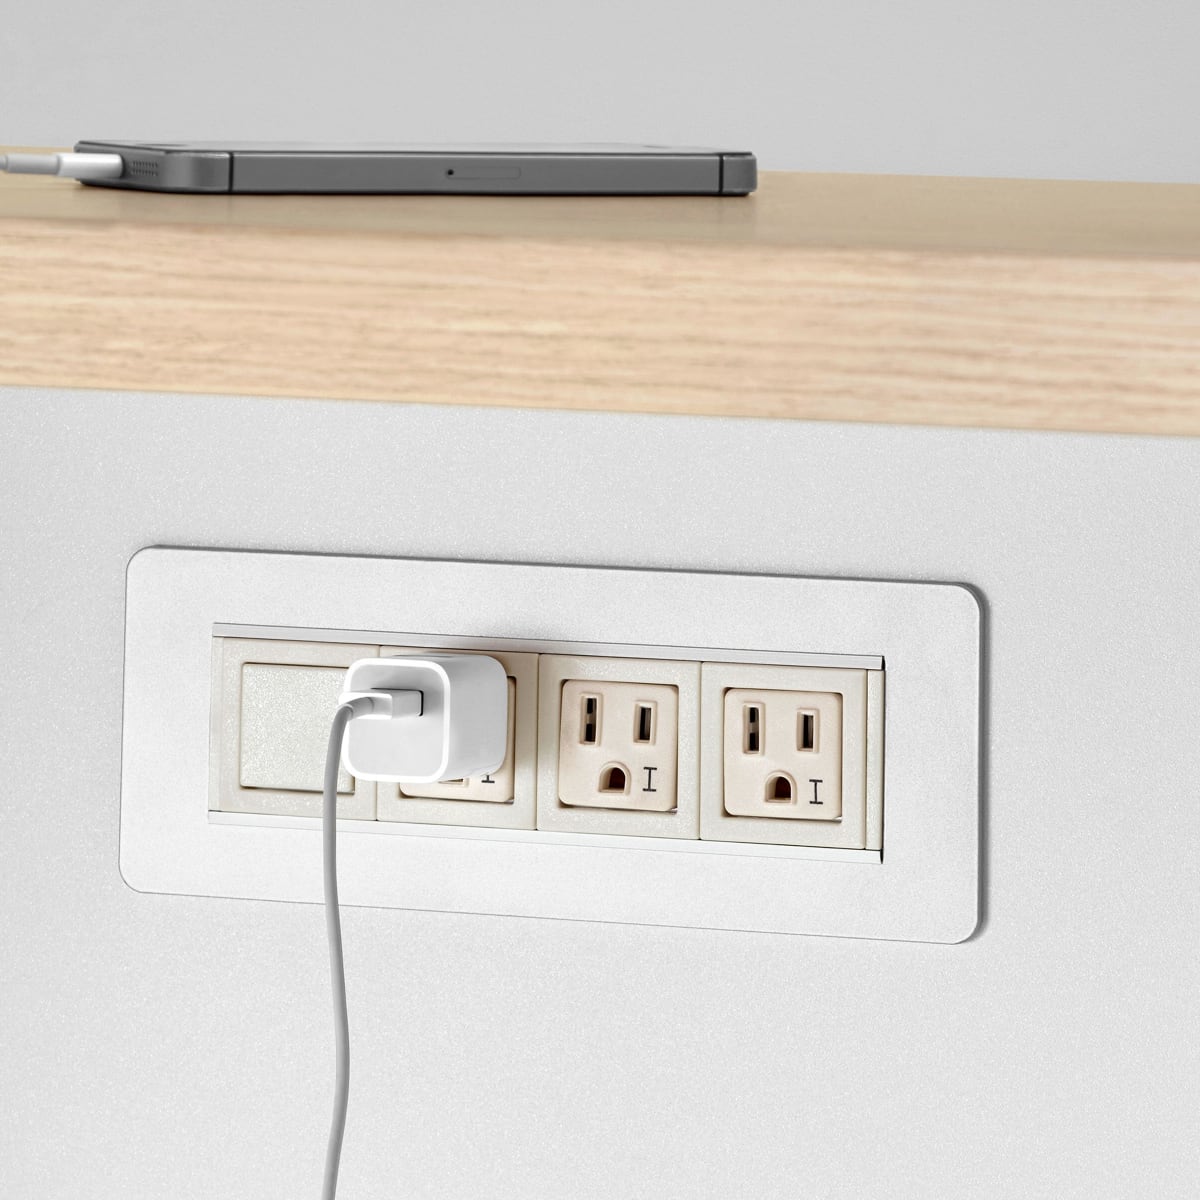 Close up image of a white Meridian Storage power unit with three AC outlets and a white power cable plugged into one of the outlets.